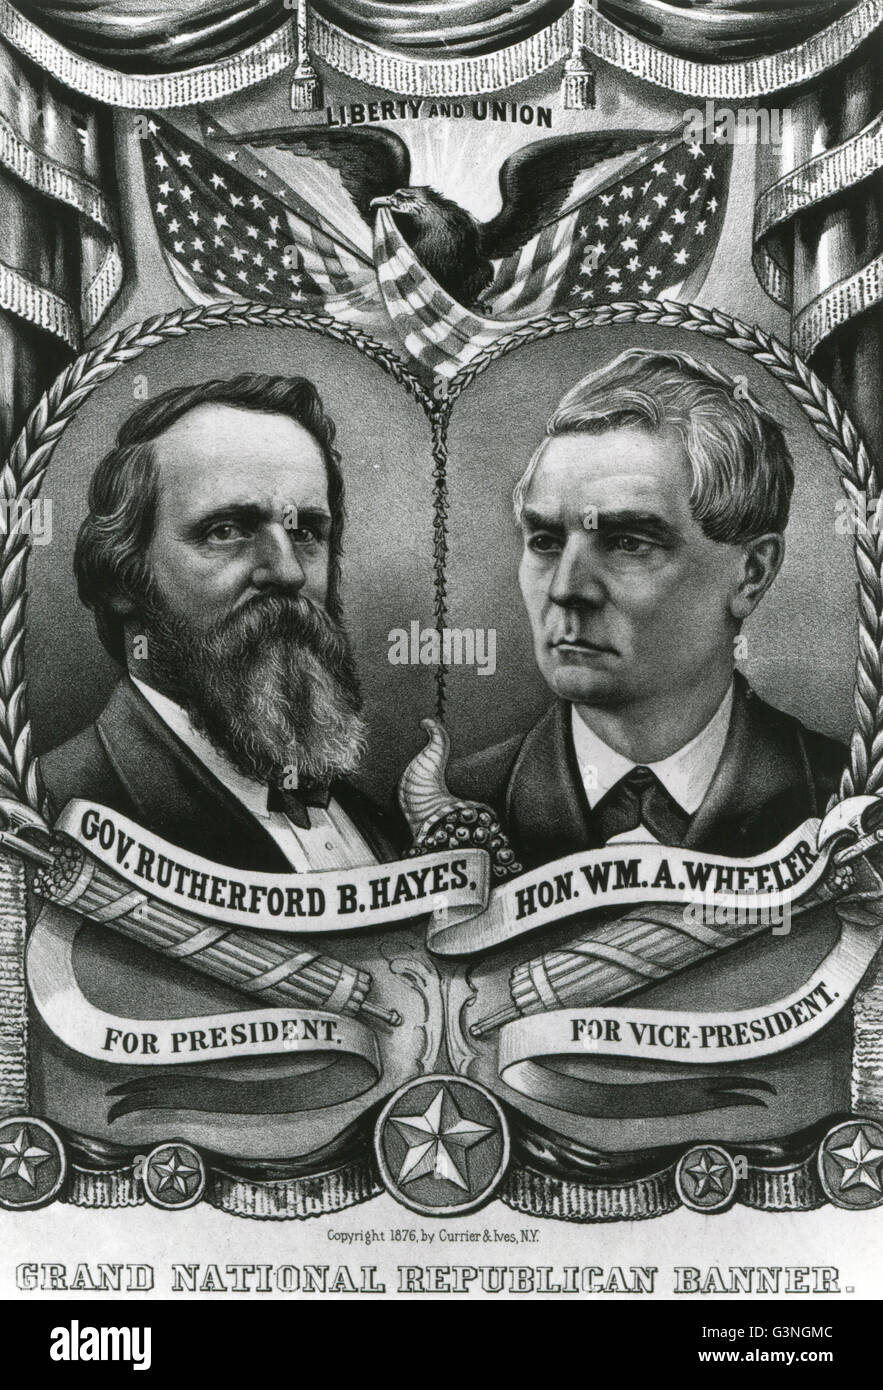 Republican campaign poster of 1876 with Rutherford B. Hayes for President and William A. Wheeler for Vice President. Stock Photo